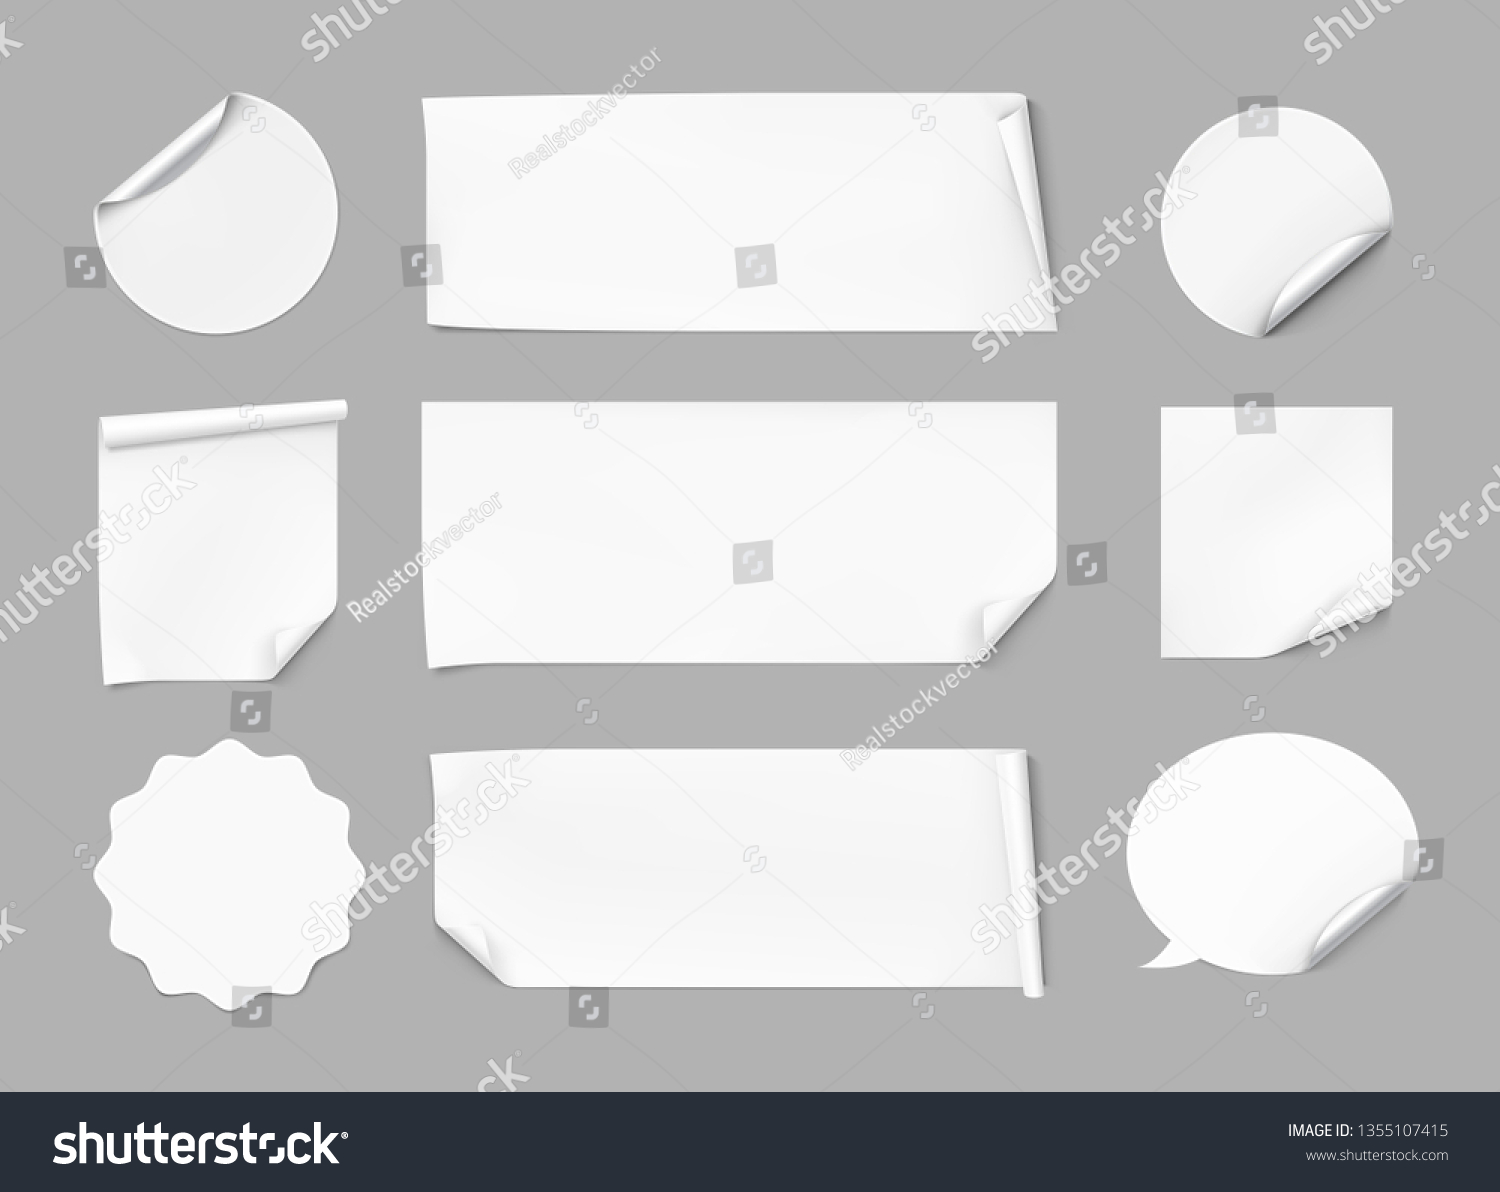 Curled stickers set. Vector illustration on gray background. Can be use for template your design, promo, adv. EPS10. #1355107415